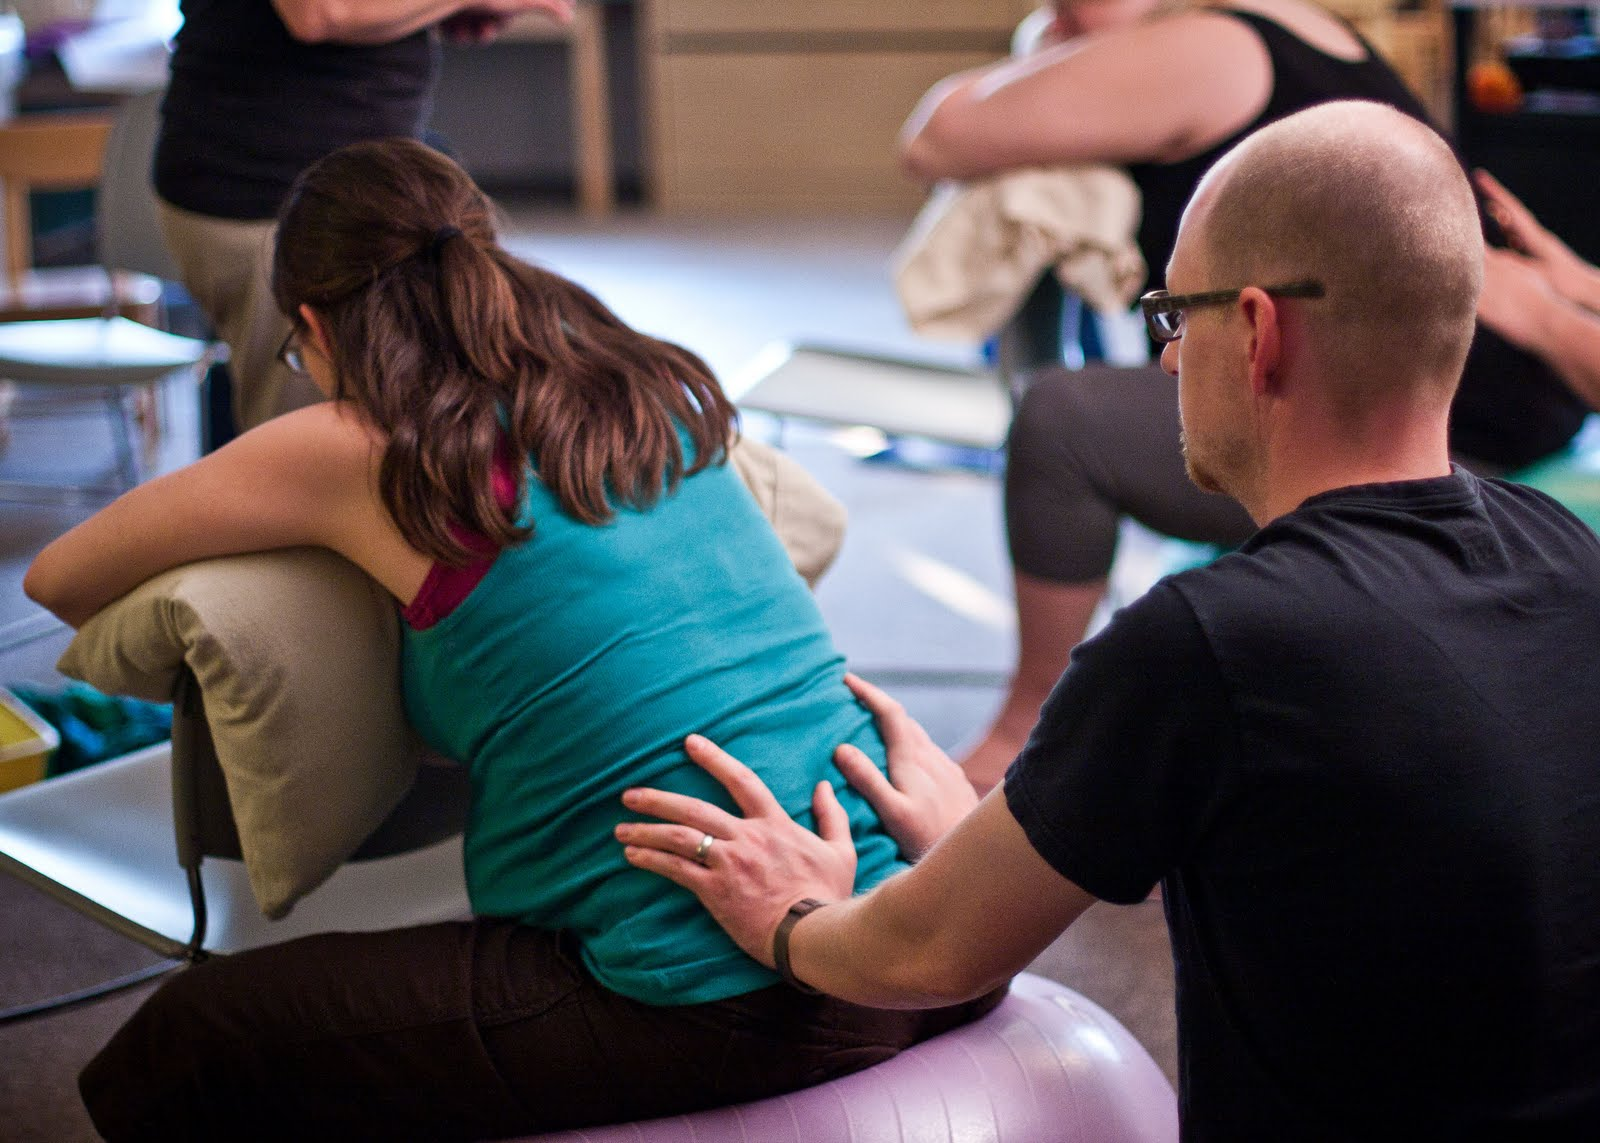 Husband rubbing back of pregnant wife sitting on an exercise ball in The Bradley Method class.